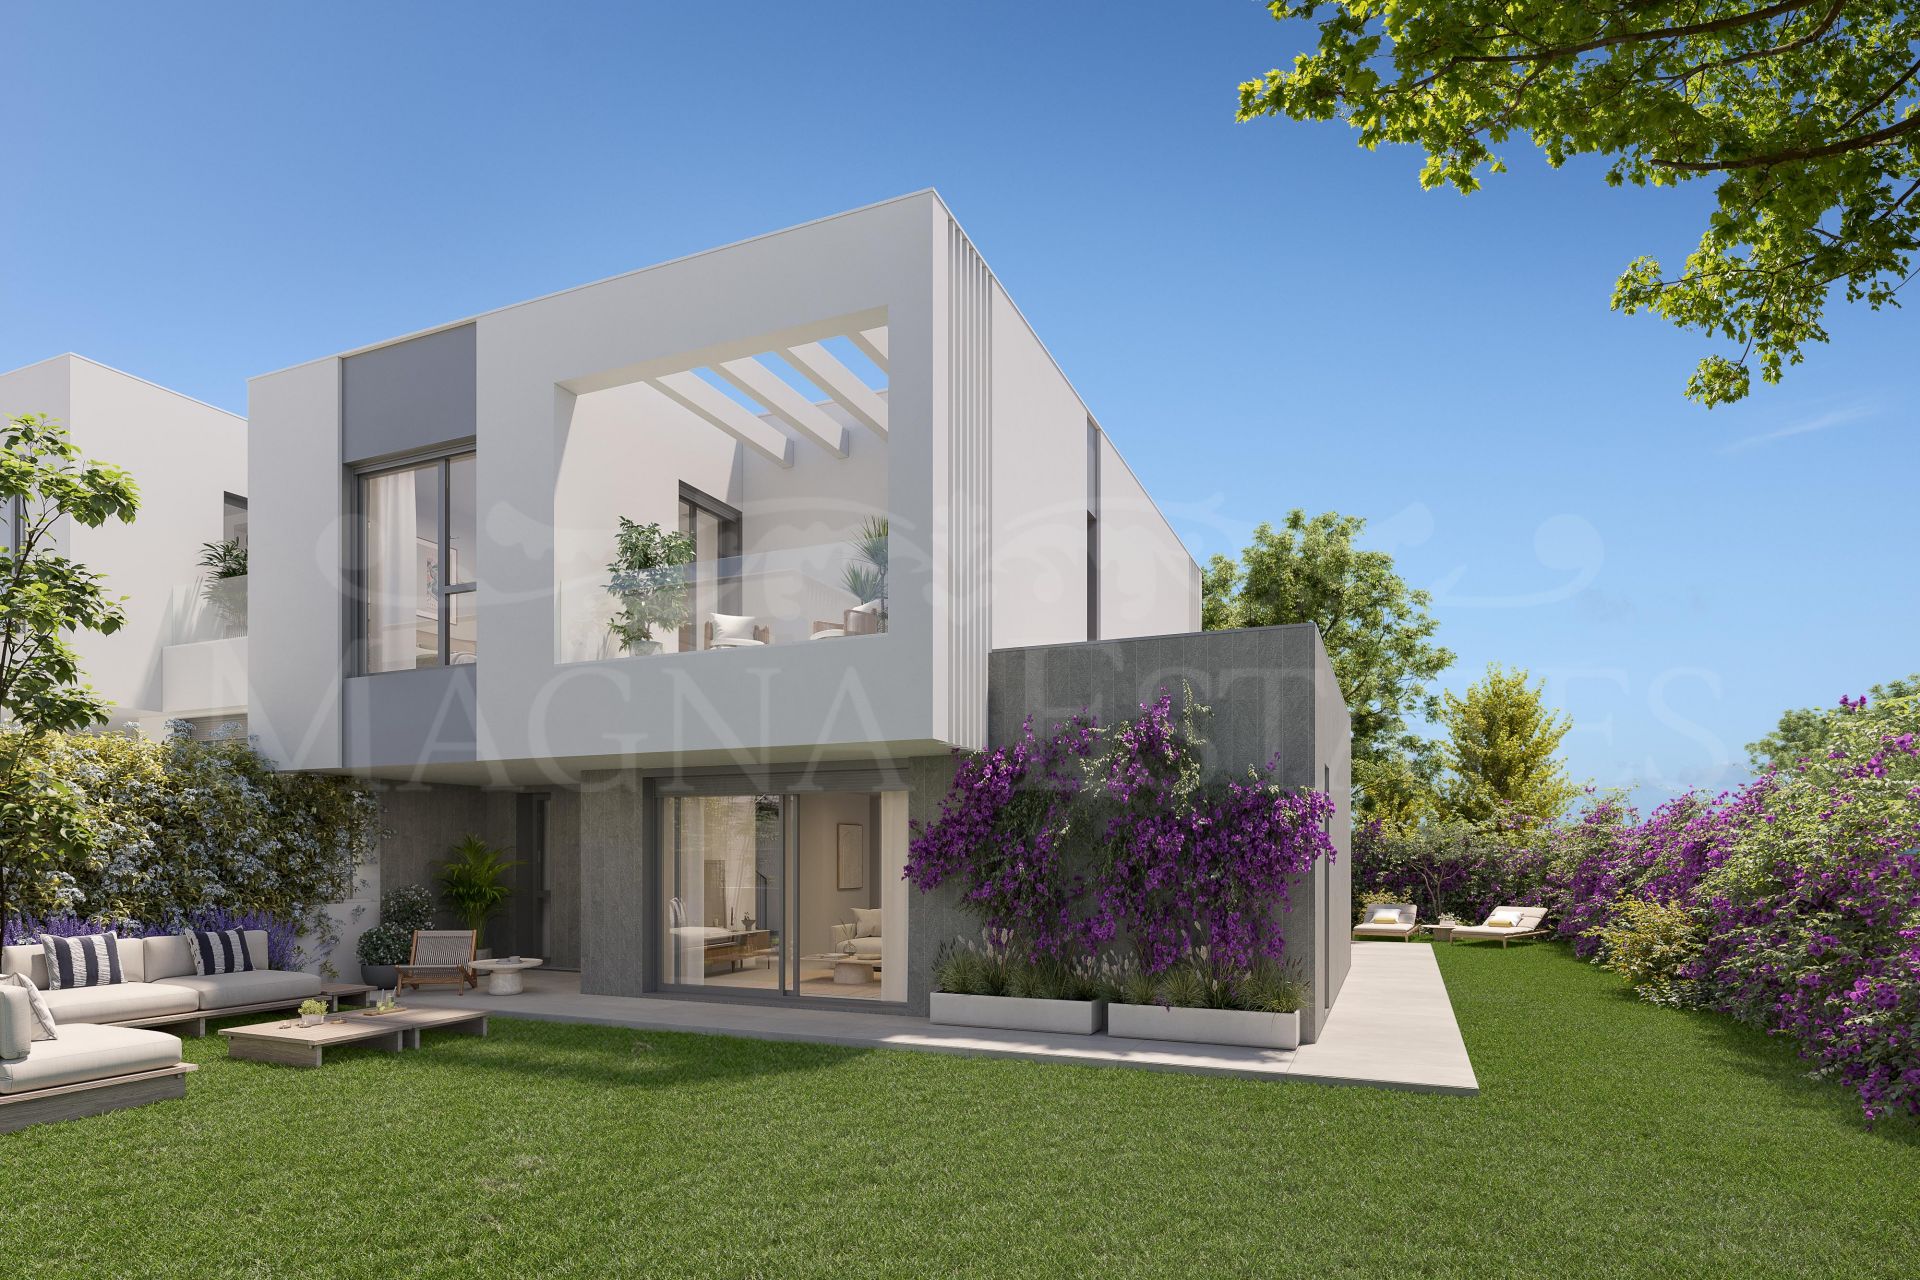 Brand new townhouse in Elviria, 100 meters from the beach, Marbella